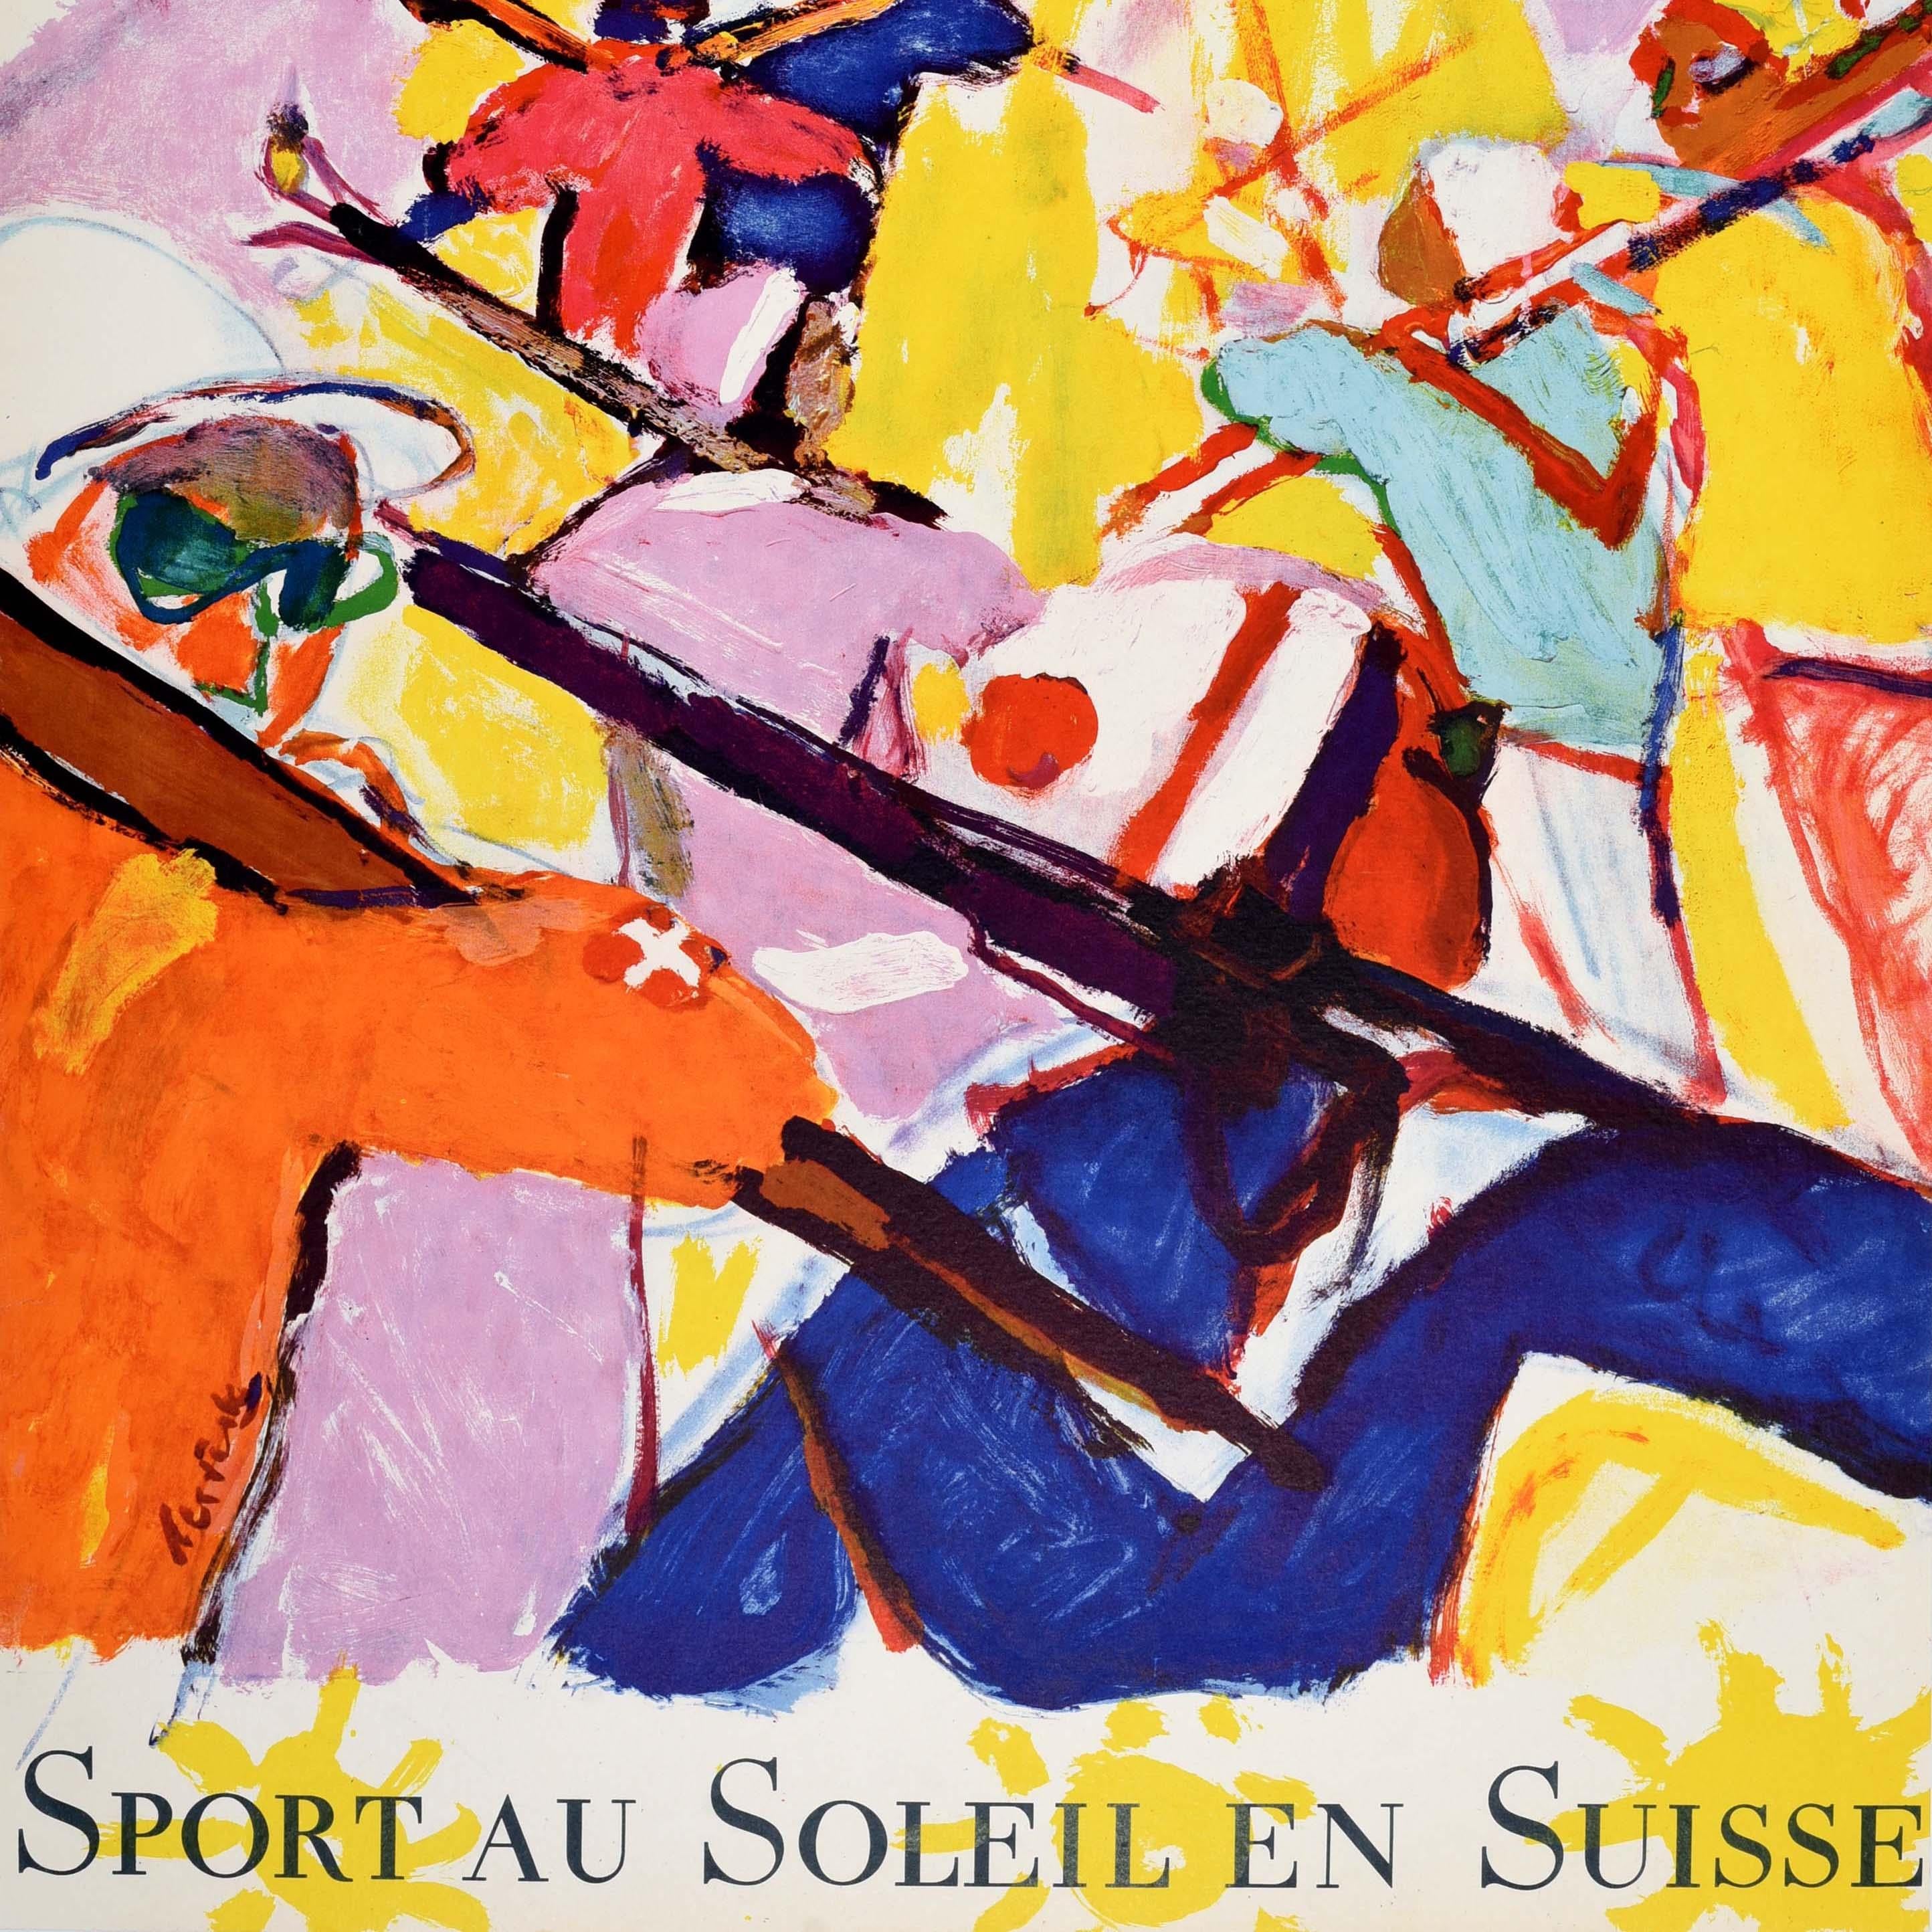 Original Vintage Winter Sport Skiing Poster Sport In The Sun Ski Switzerland In Good Condition For Sale In London, GB